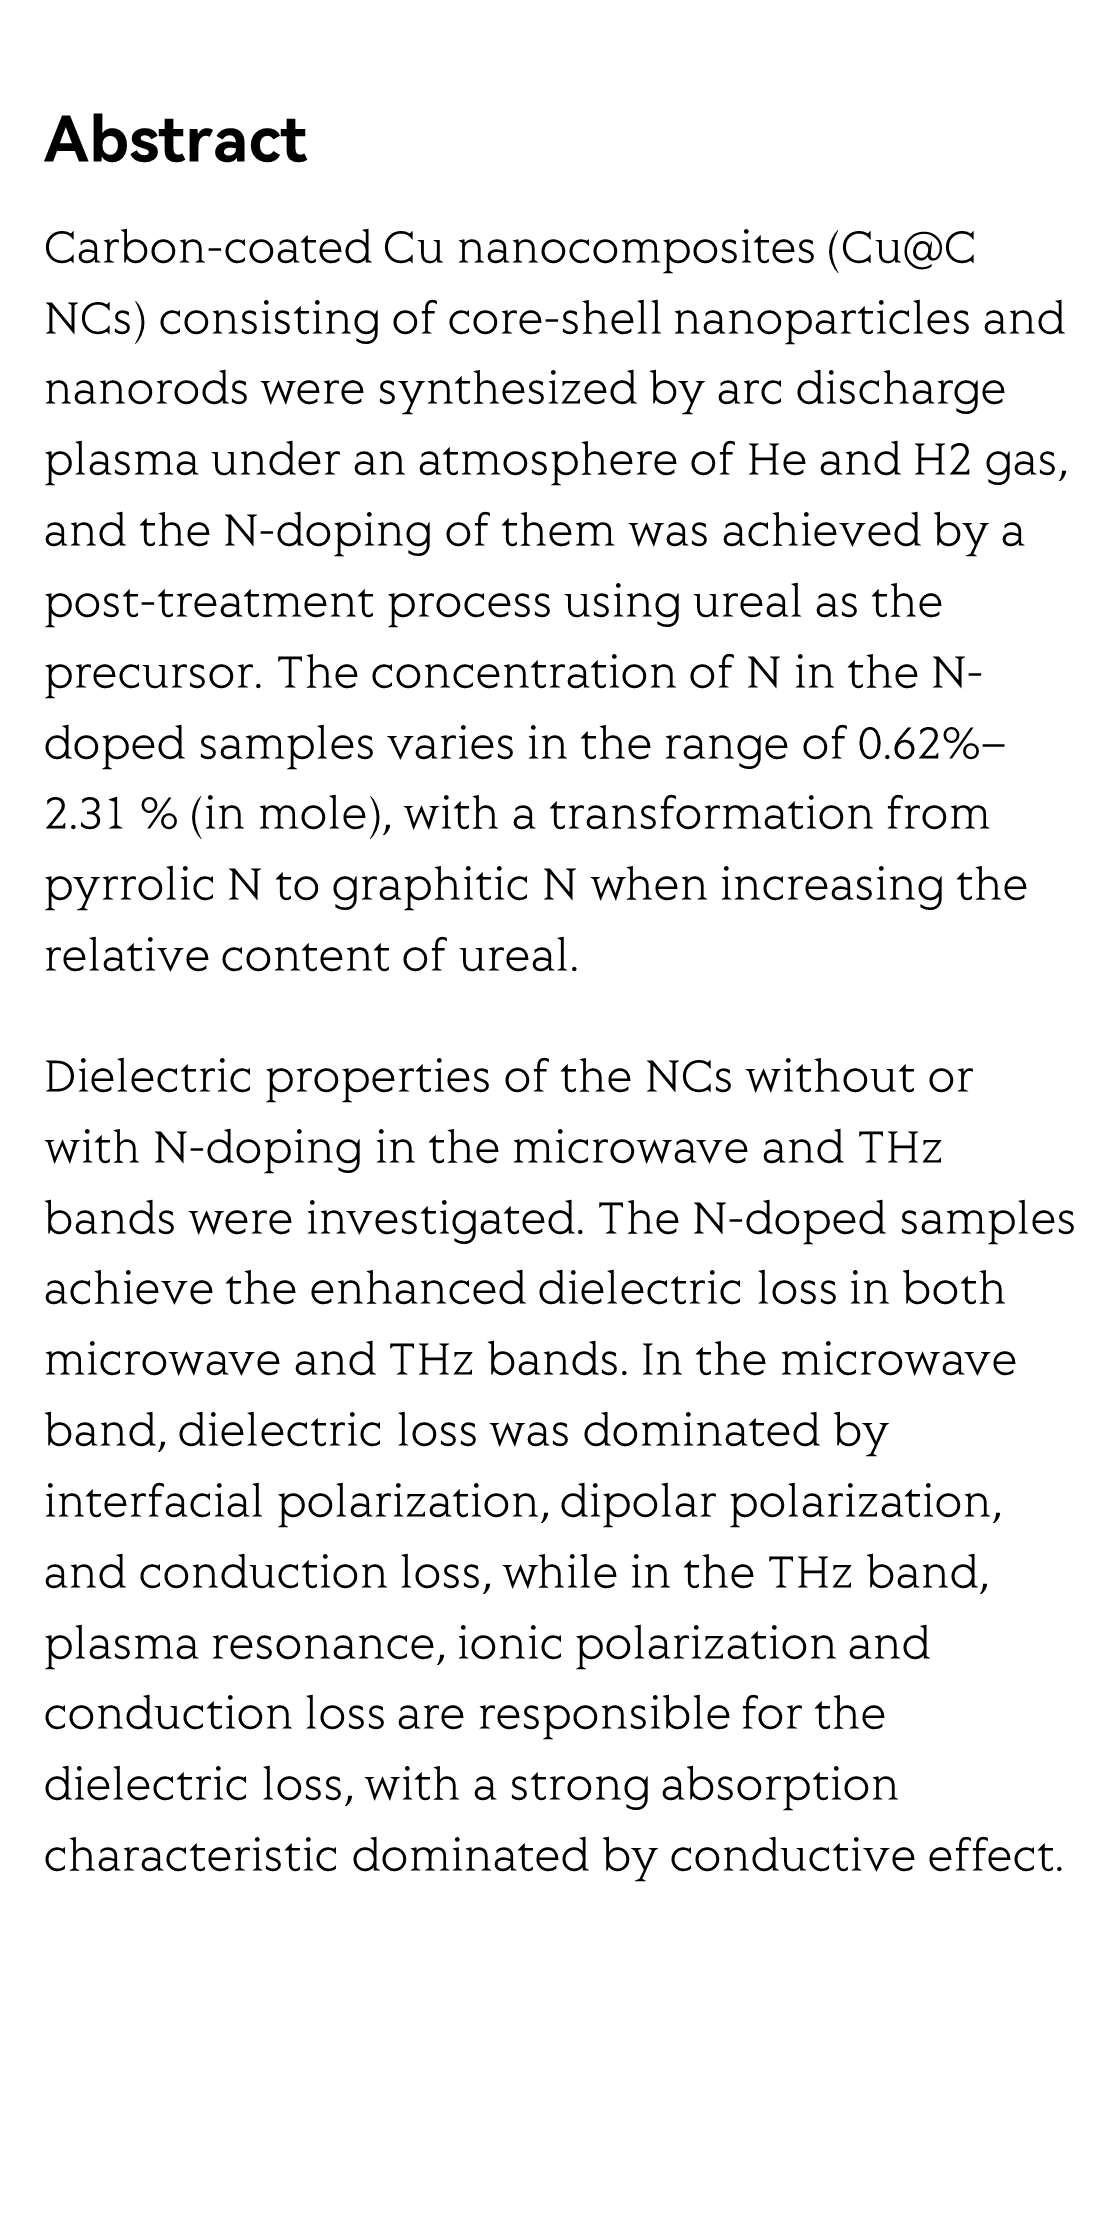 Influence of N-doping on dielectric properties of carbon-coated copper nanocomposites in the microwave and terahertz ranges_2